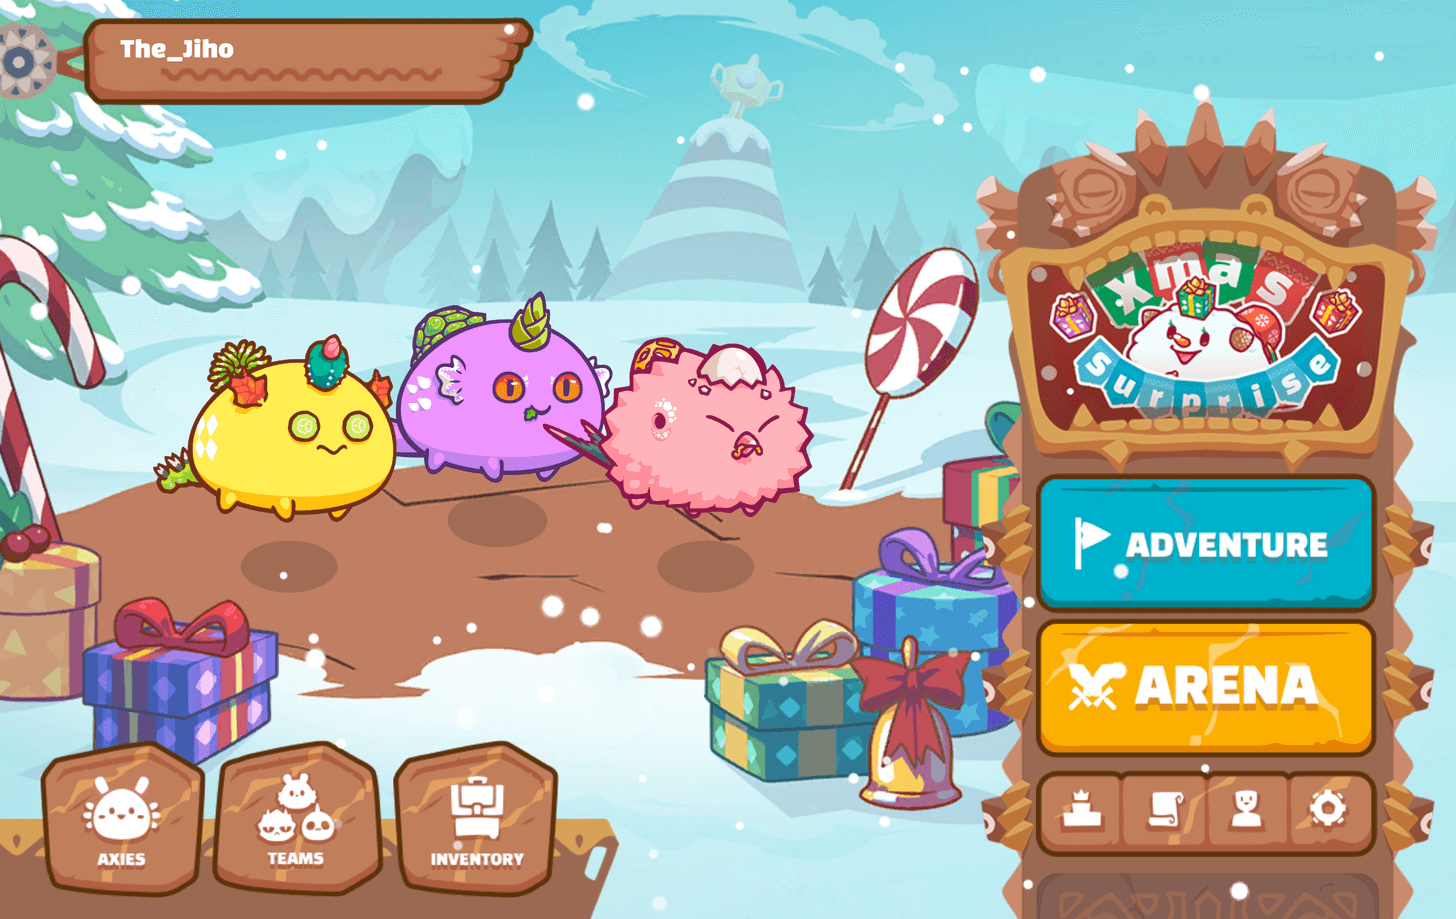 ‘Axie Infinity’ devs ‘look forward’ to working with gov’ts on play-to-earn games